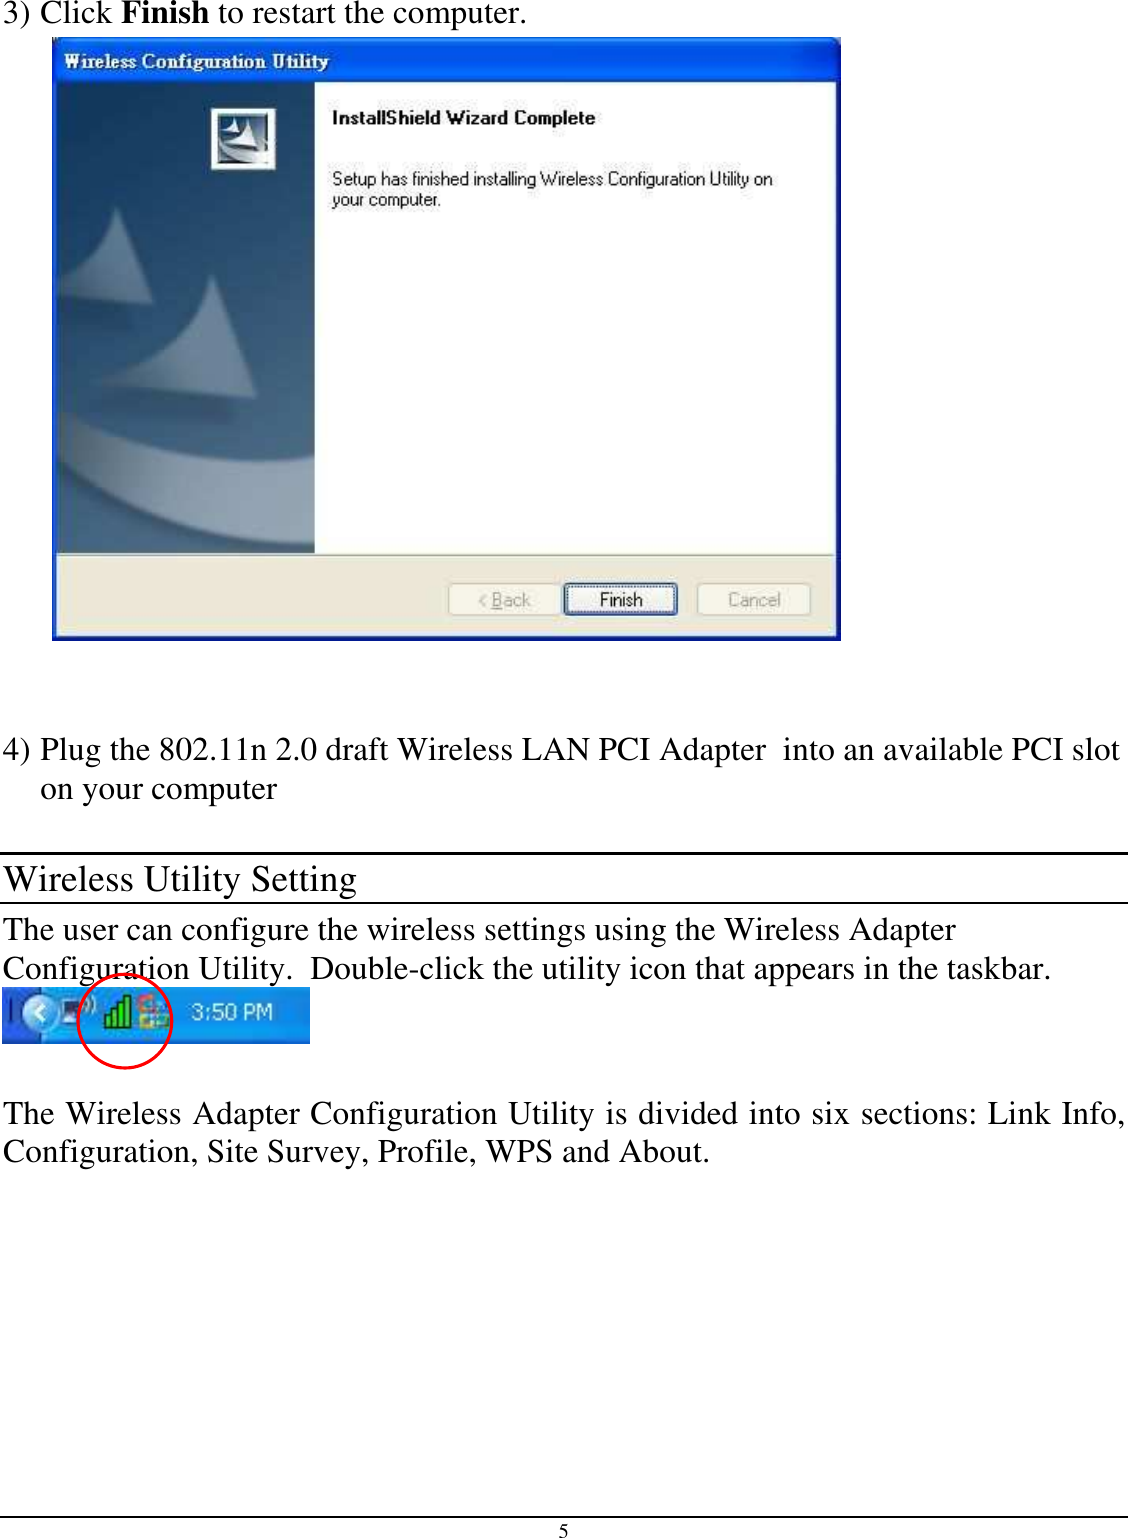 5  3) Click Finish to restart the computer.    4) Plug the 802.11n 2.0 draft Wireless LAN PCI Adapter  into an available PCI slot on your computer  Wireless Utility Setting The user can configure the wireless settings using the Wireless Adapter Configuration Utility.  Double-click the utility icon that appears in the taskbar.   The Wireless Adapter Configuration Utility is divided into six sections: Link Info, Configuration, Site Survey, Profile, WPS and About.  